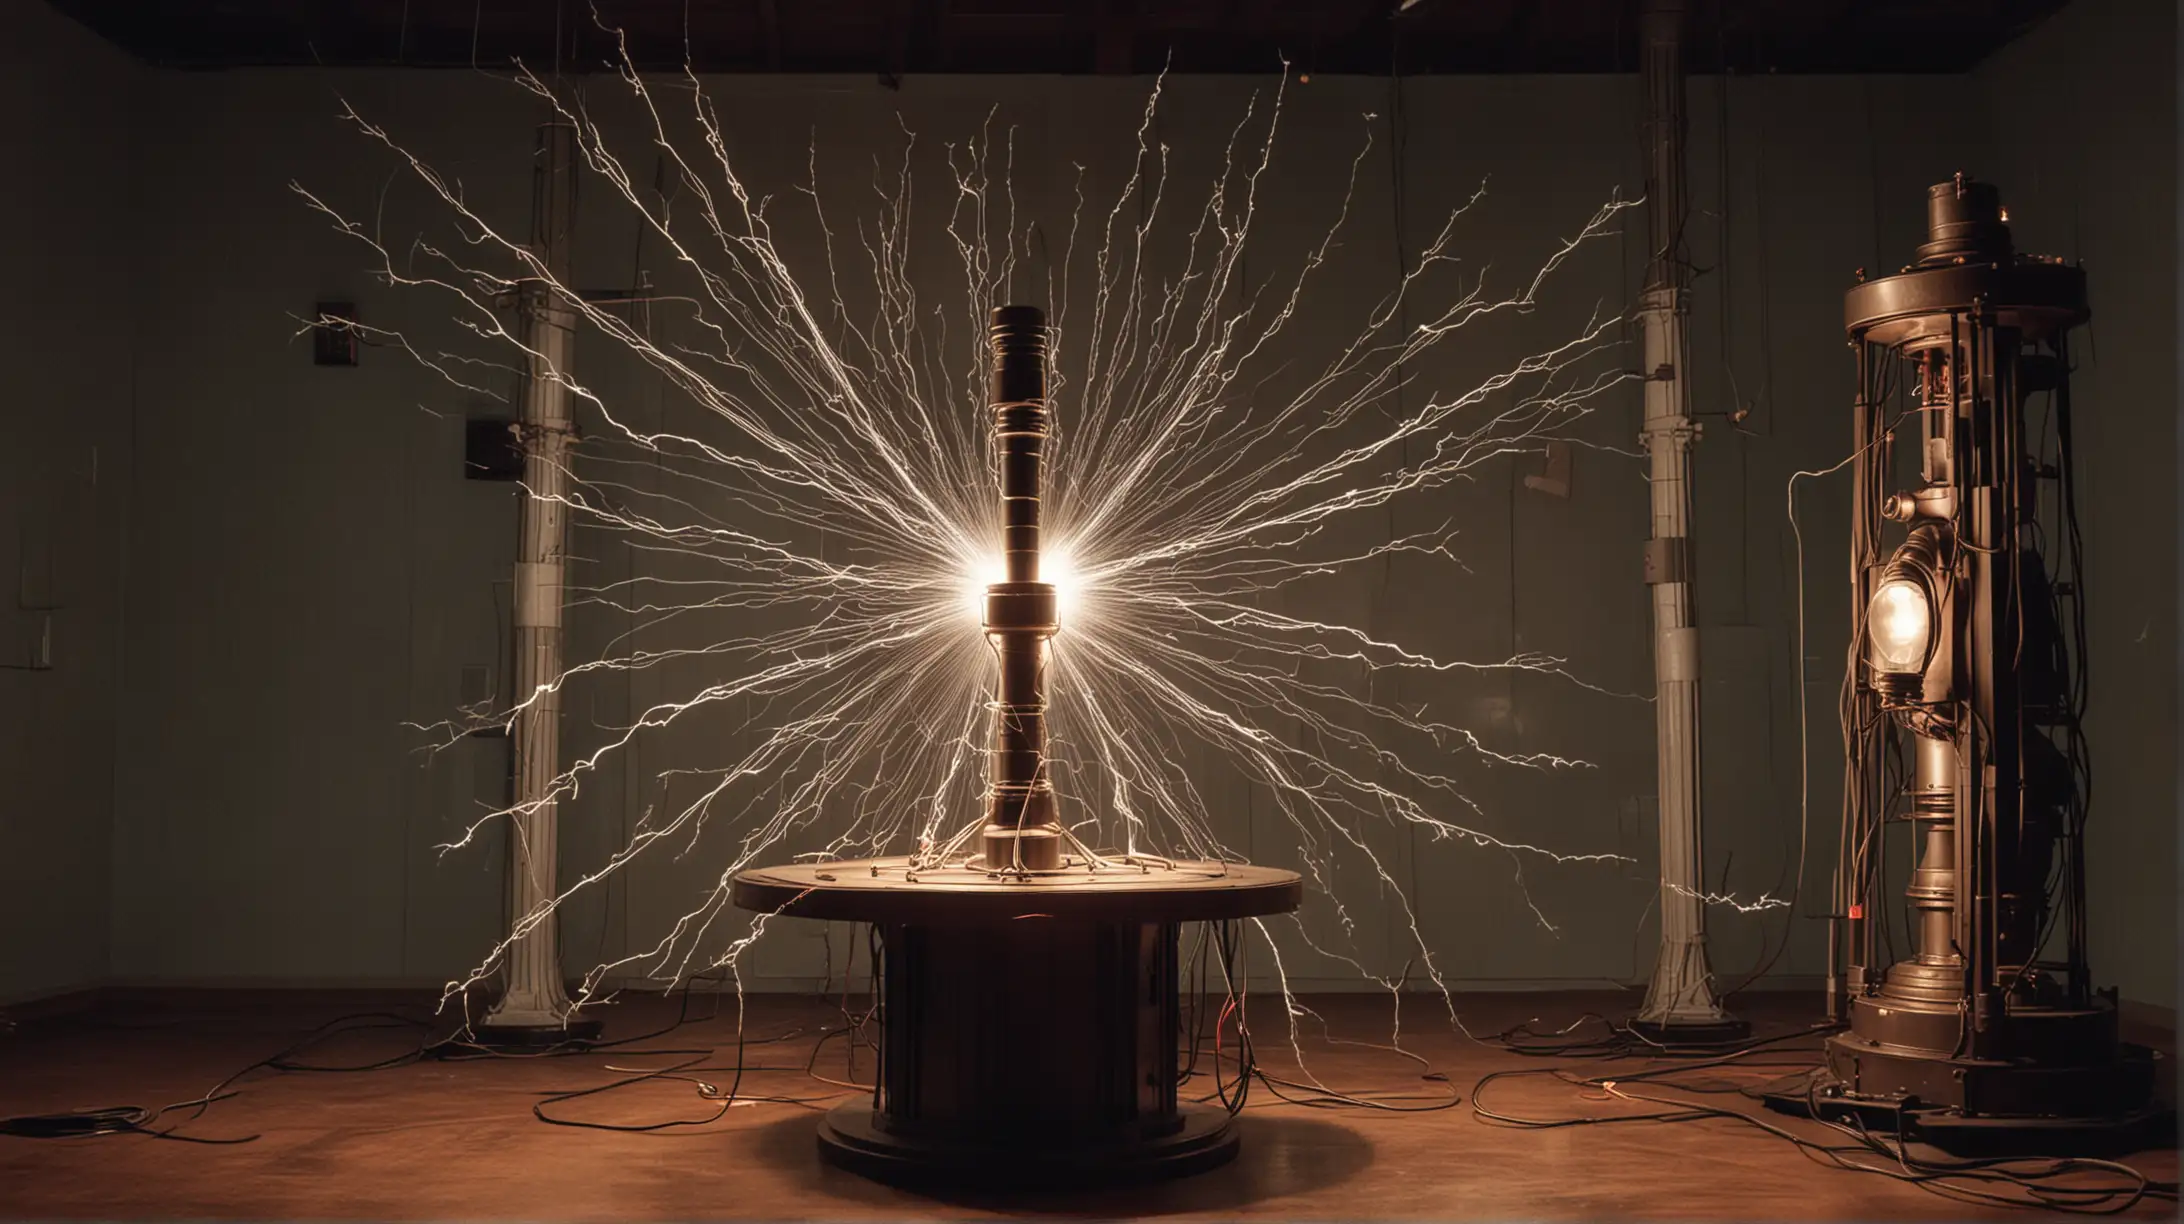 Visualize Tesla's Iconic Inventions:

Image Description: Generate a dynamic scene showcasing Nikola Tesla surrounded by his inventions such as the Tesla Coil, AC motor, and Wardenclyffe Tower, highlighting his revolutionary contributions to electrical engineering.